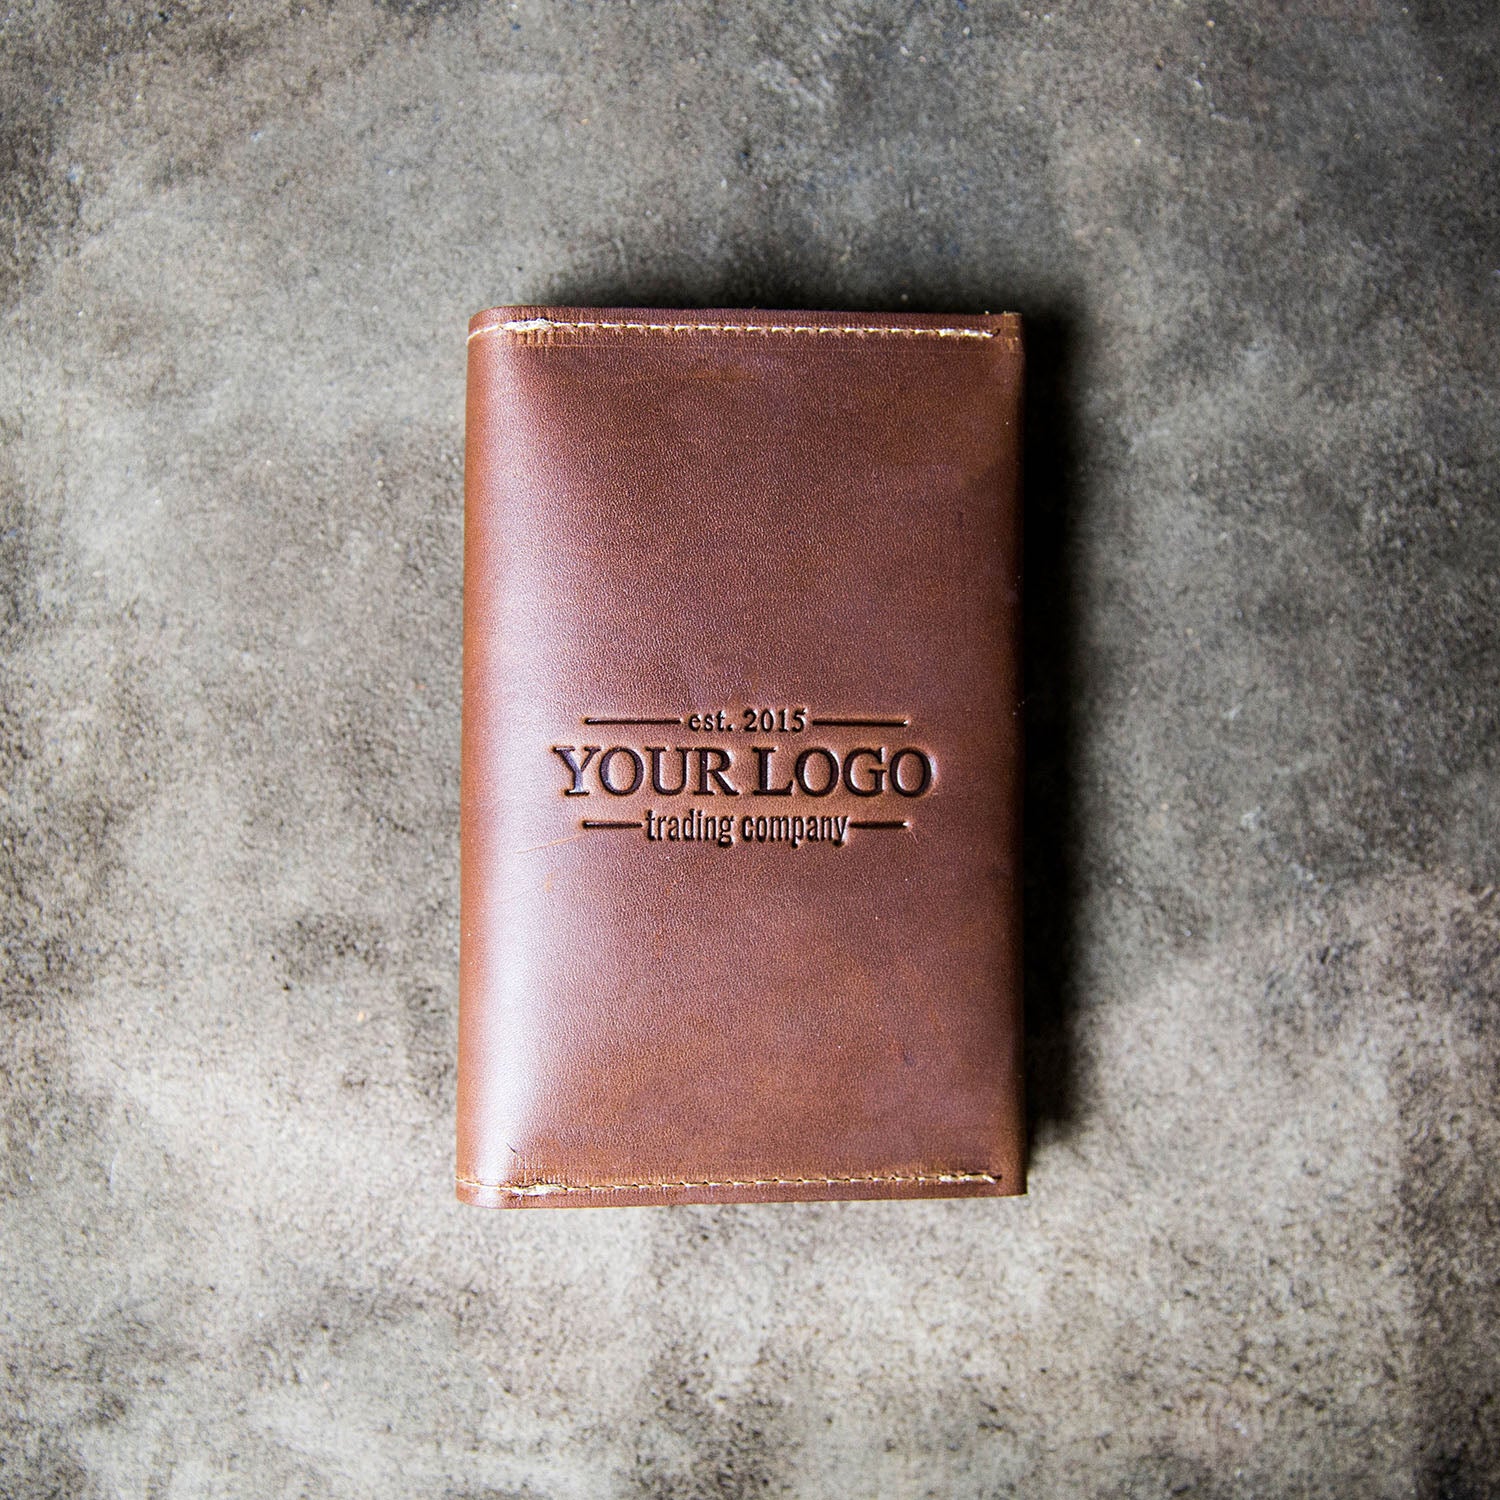 Fine American leather passport cover and wallet with a customized logo on the front